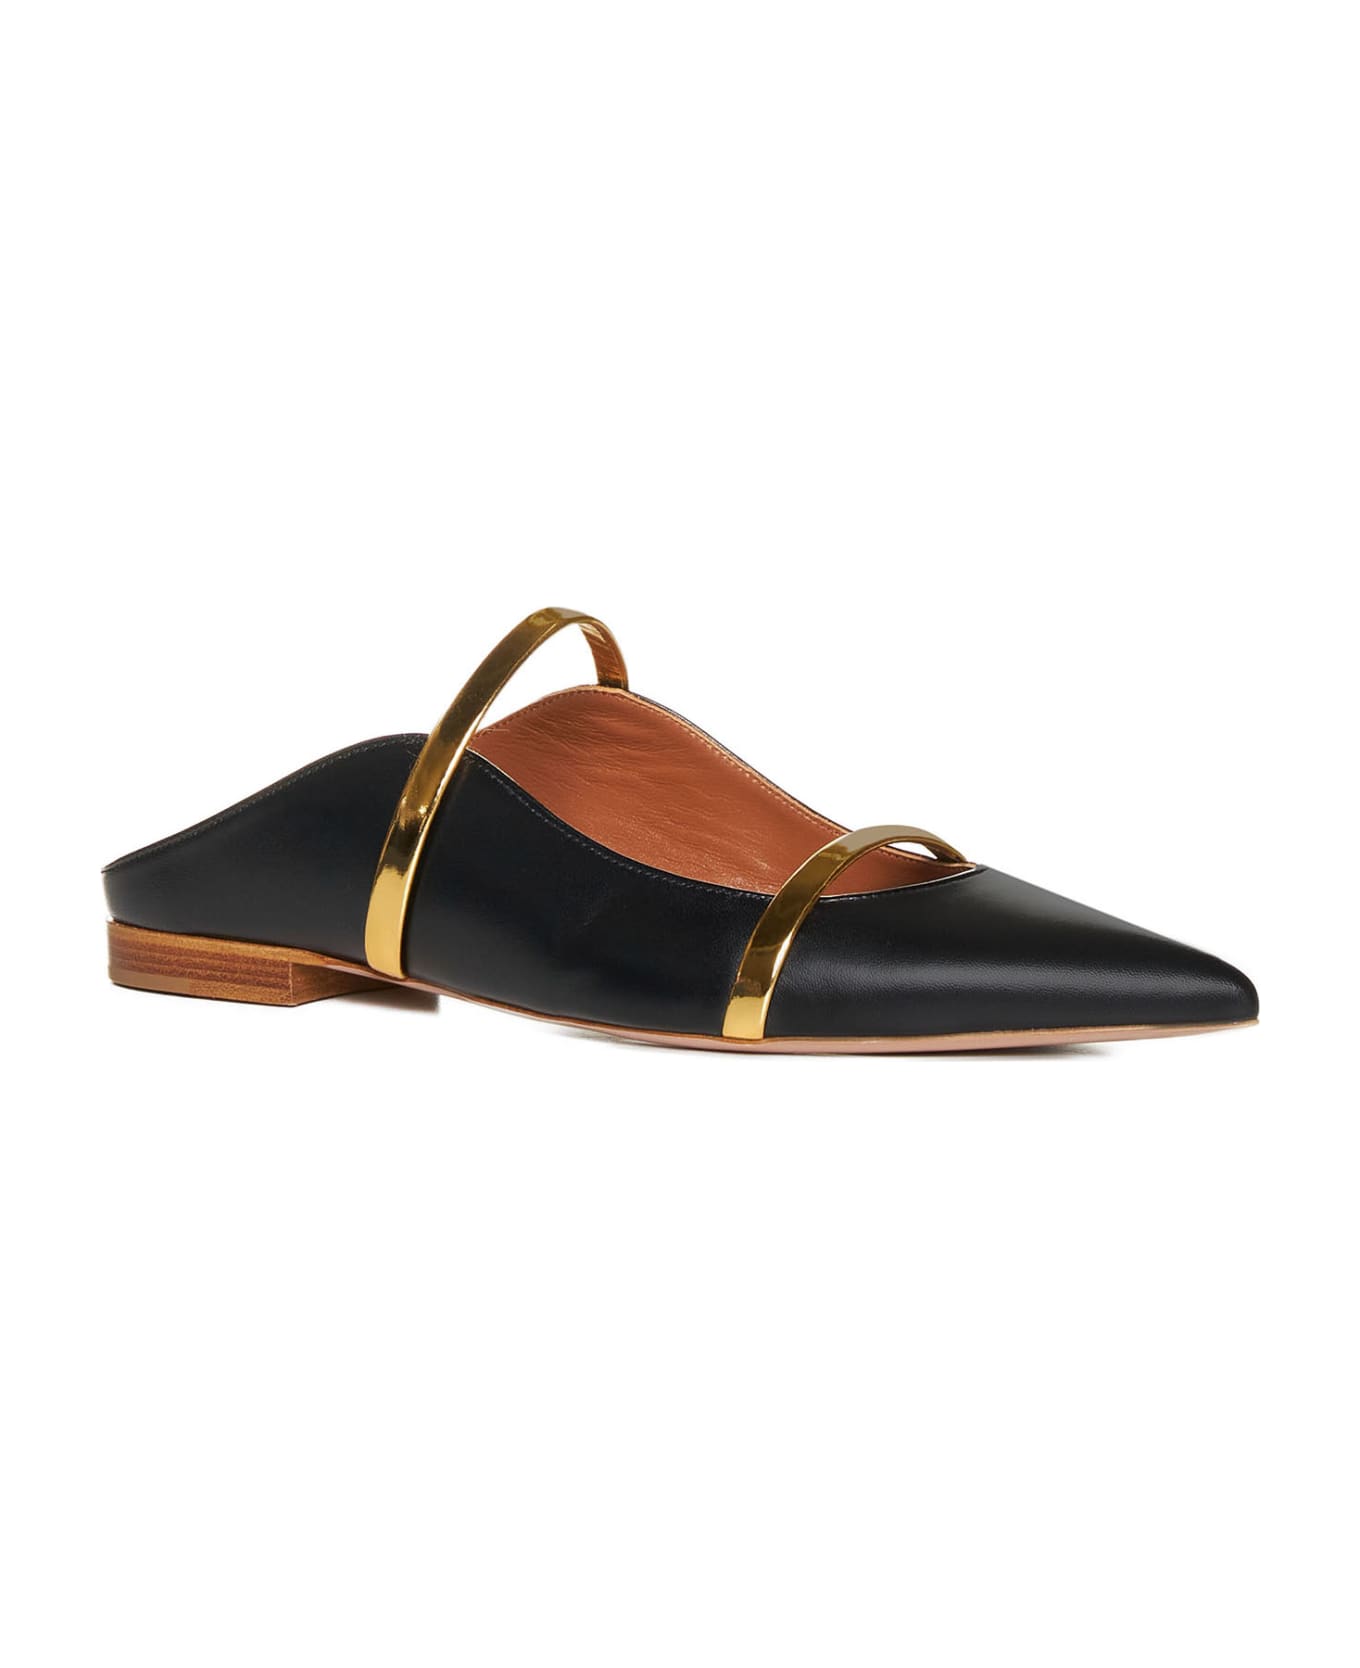 Malone Souliers Sandals - Black/gold